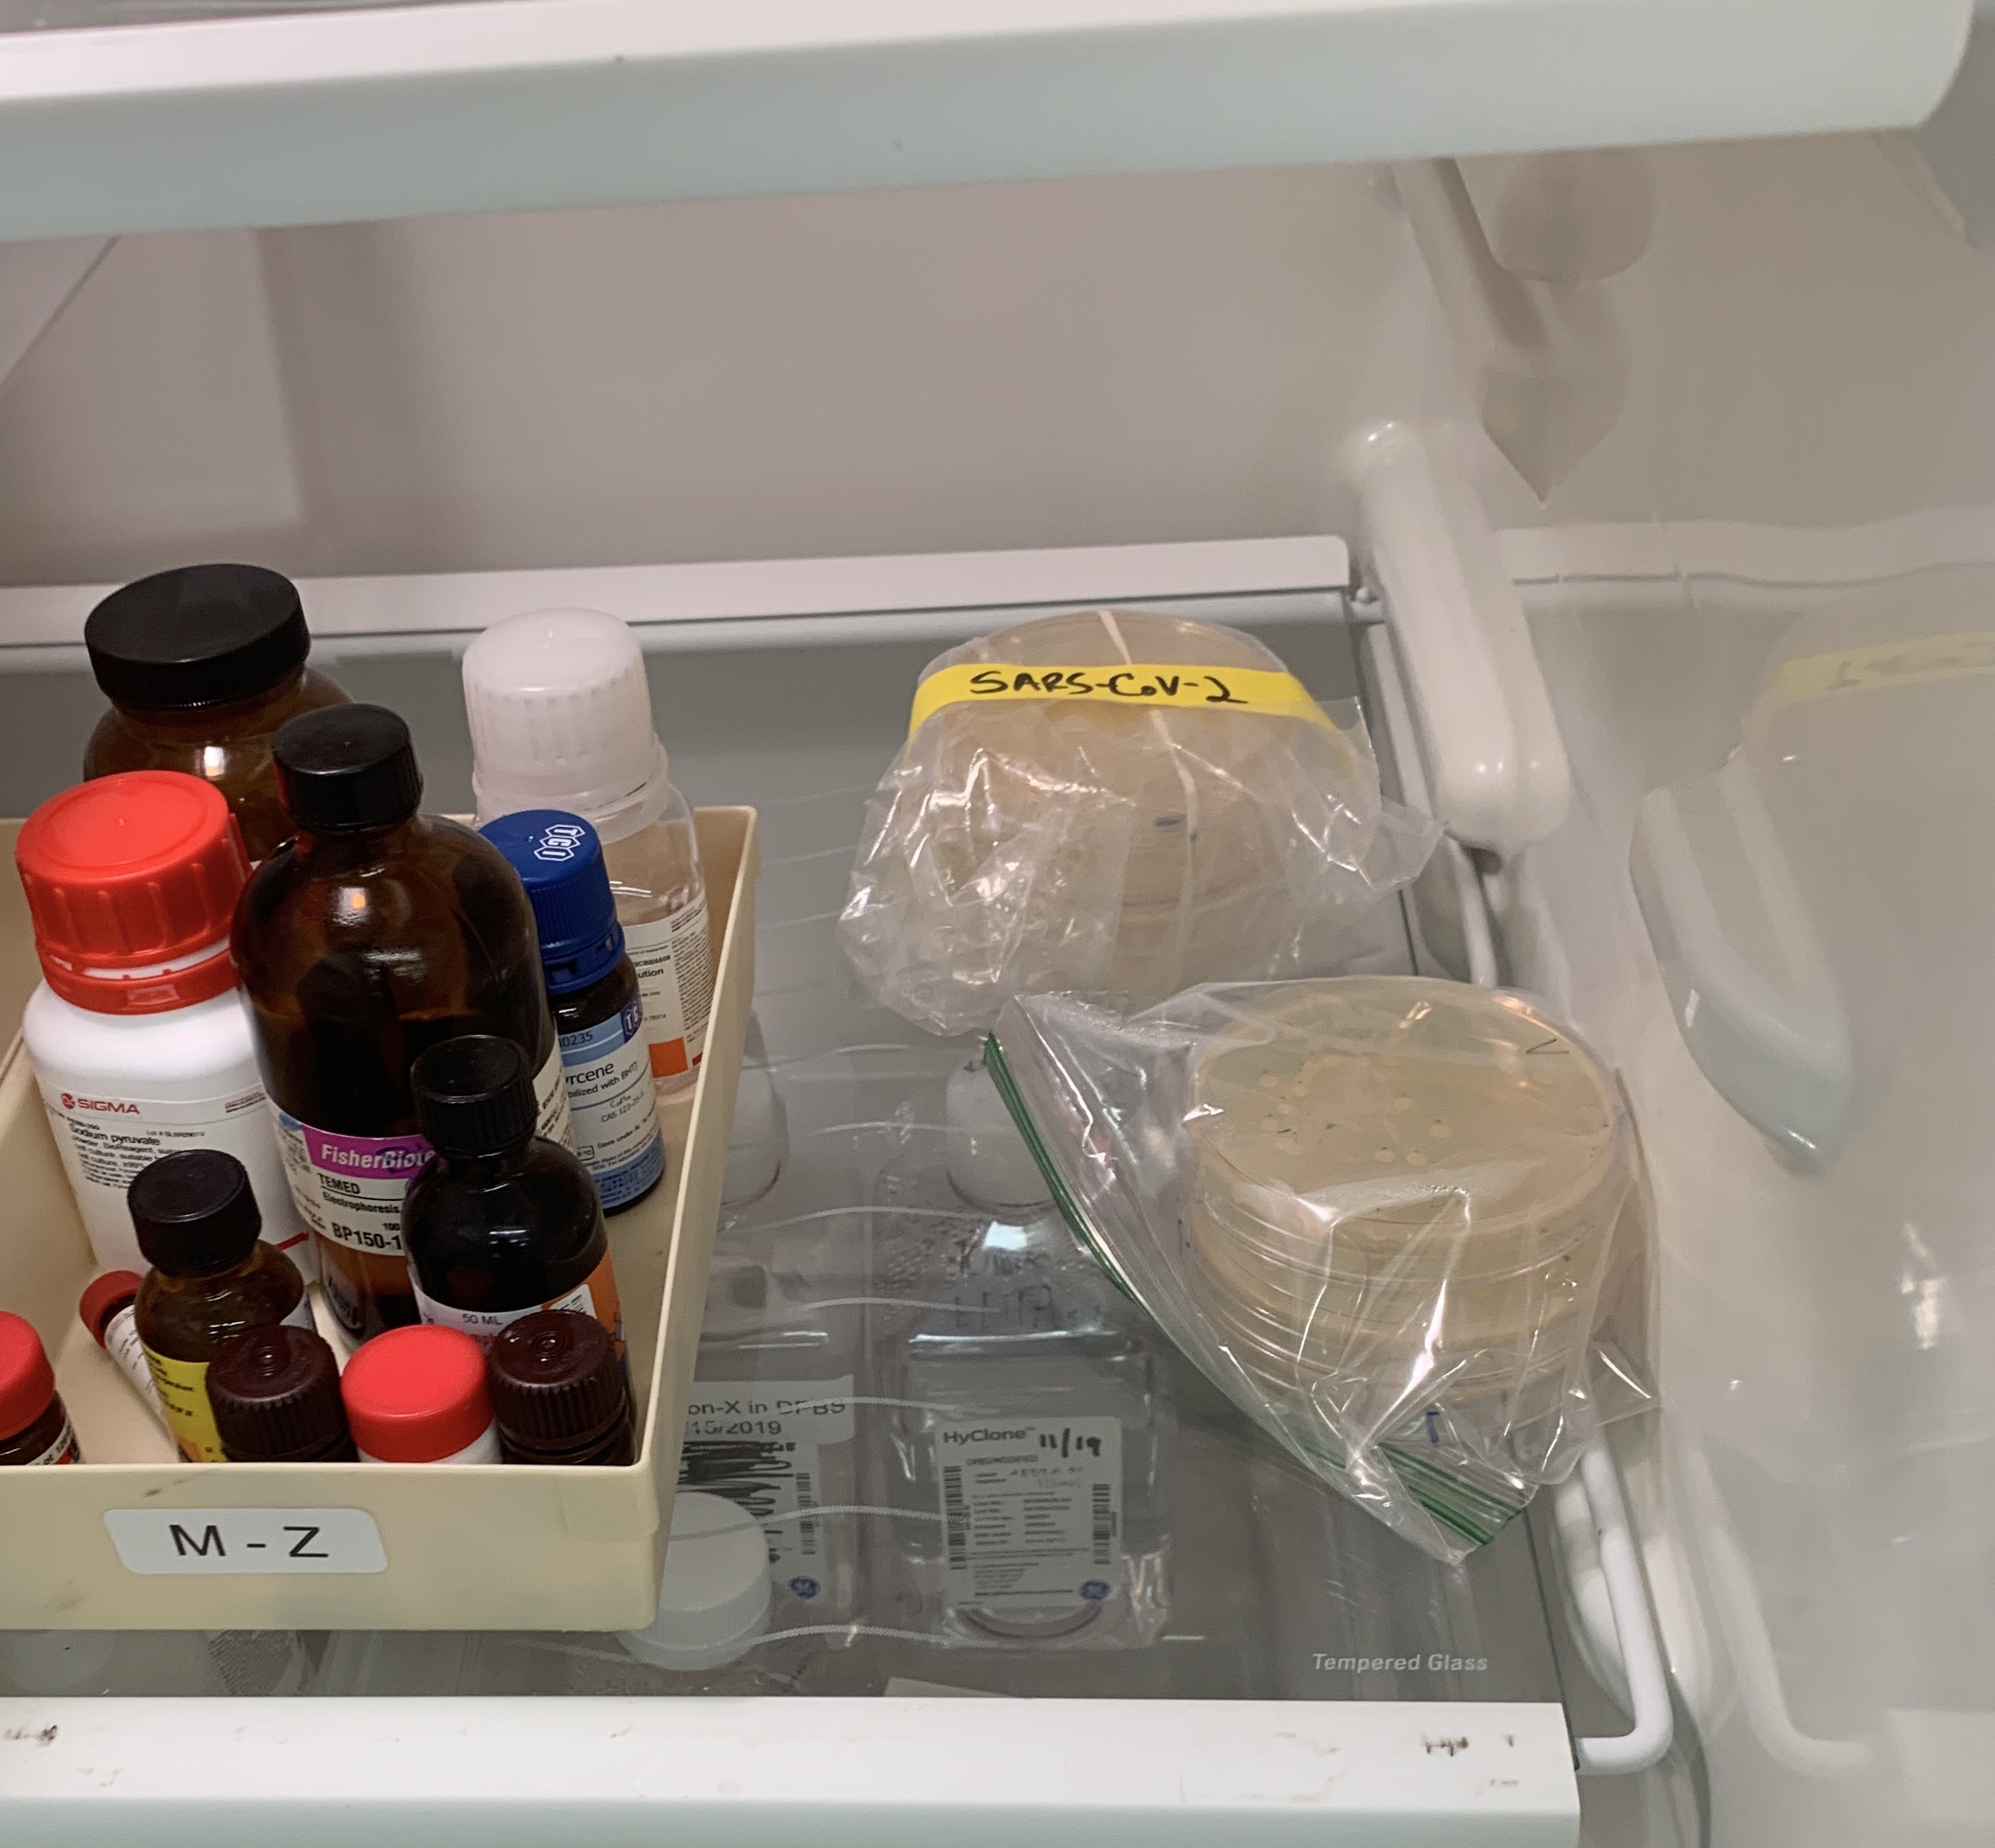 Samples of portions of the coronavirus (the petri dishes on the right) in a Georgia Tech lab refrigerator. (Photo Jennifer Leavey)